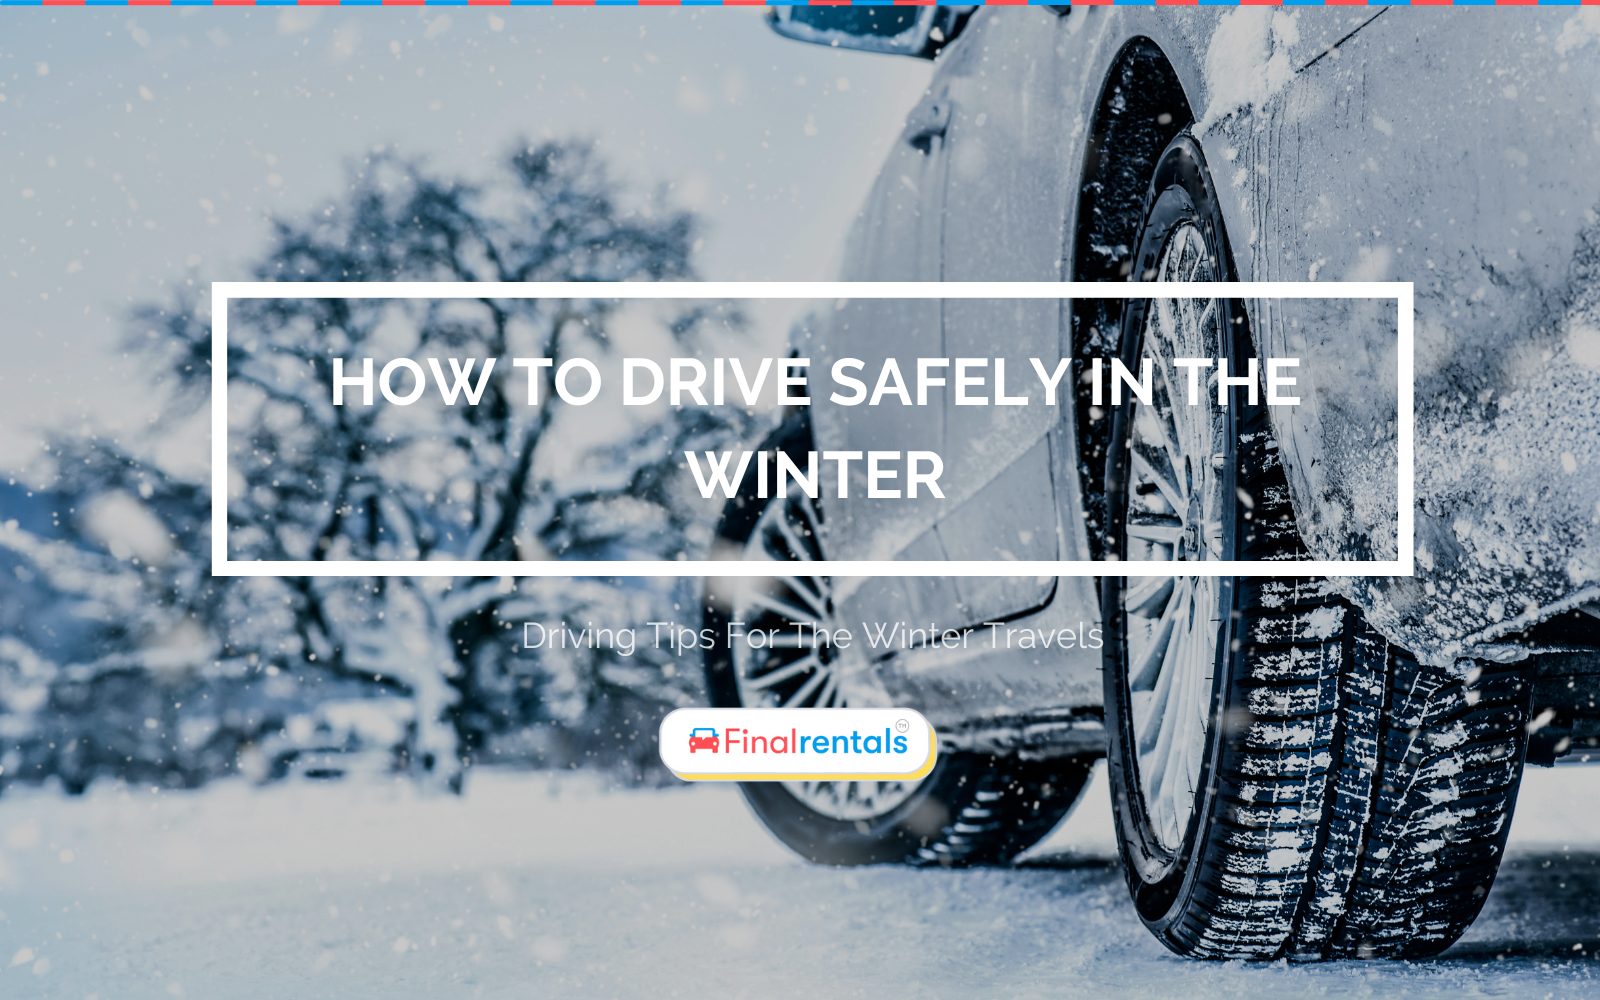 Driving Tips: How To Drive Safely in Winter